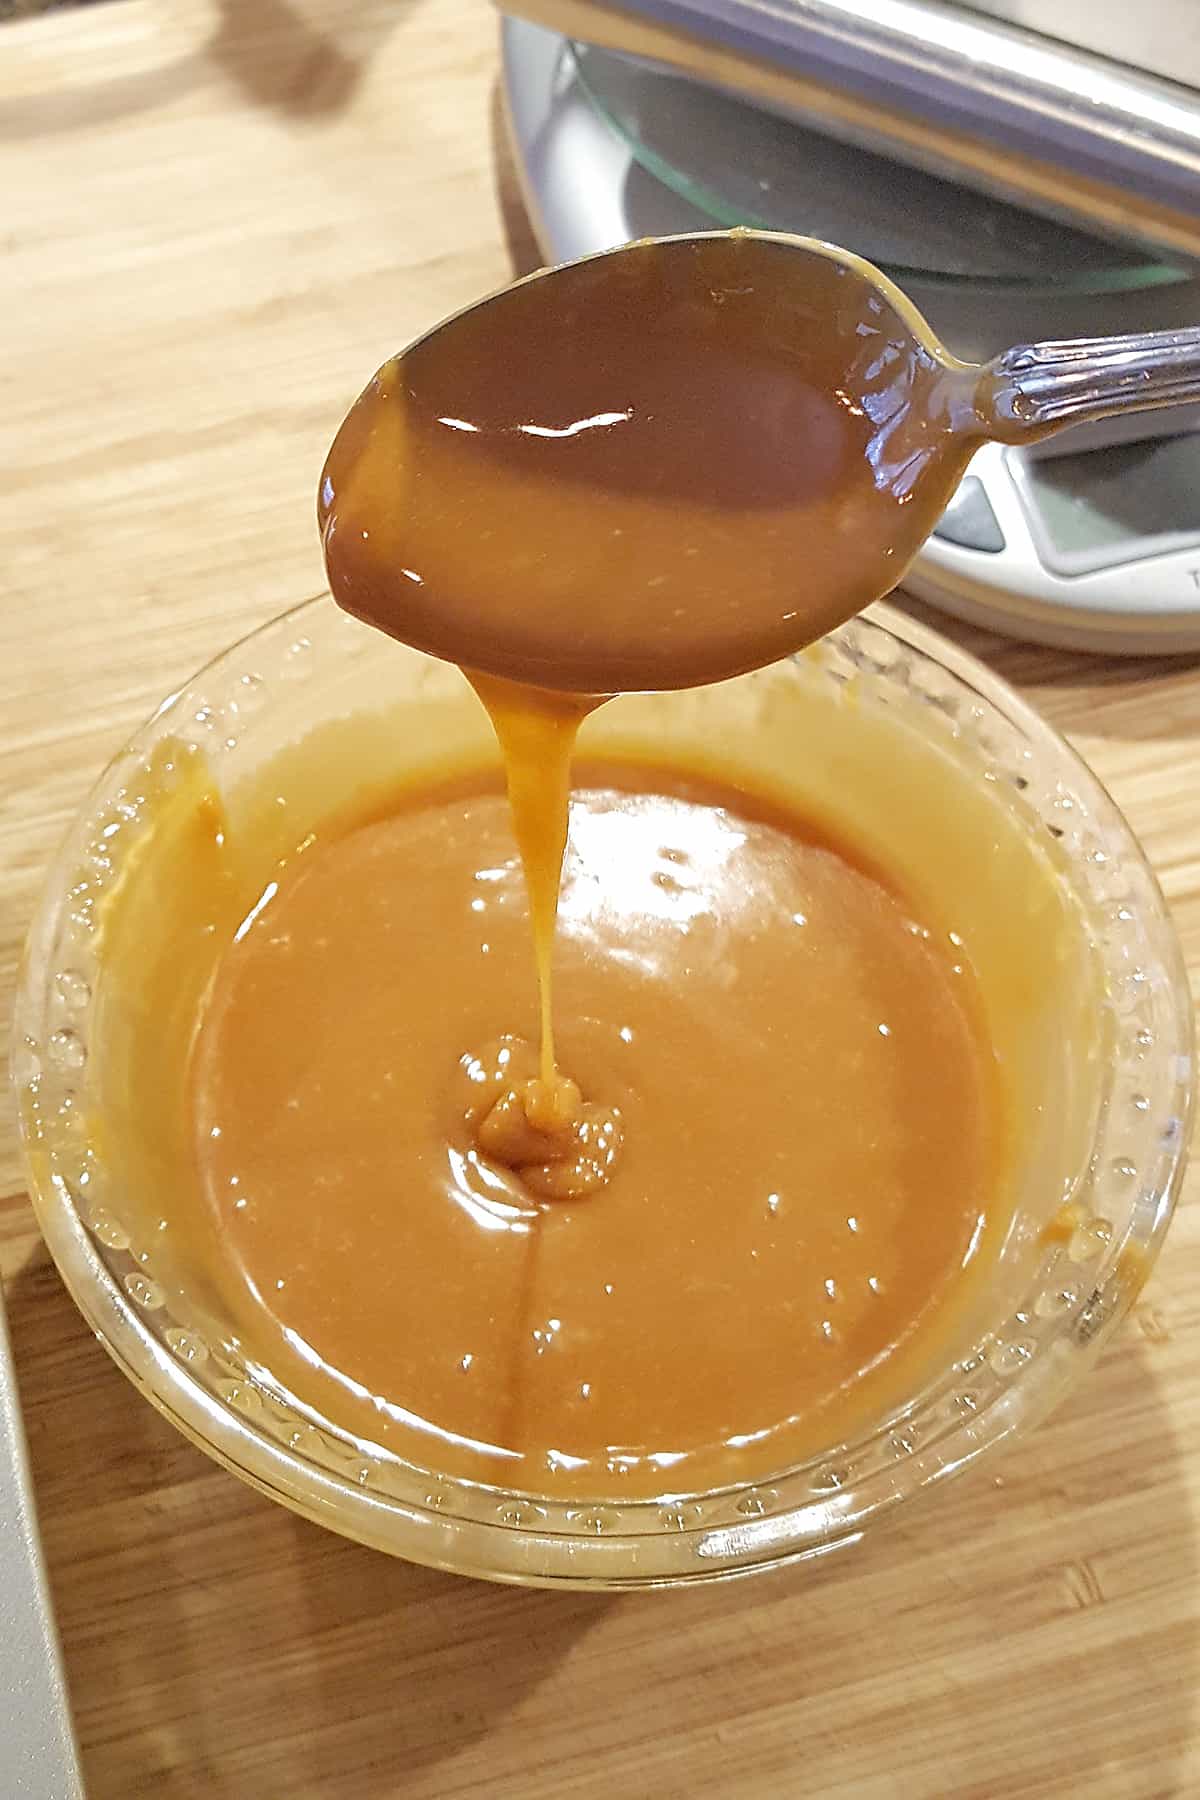 Melted caramel dripping from a spoon into a small glass bowl.